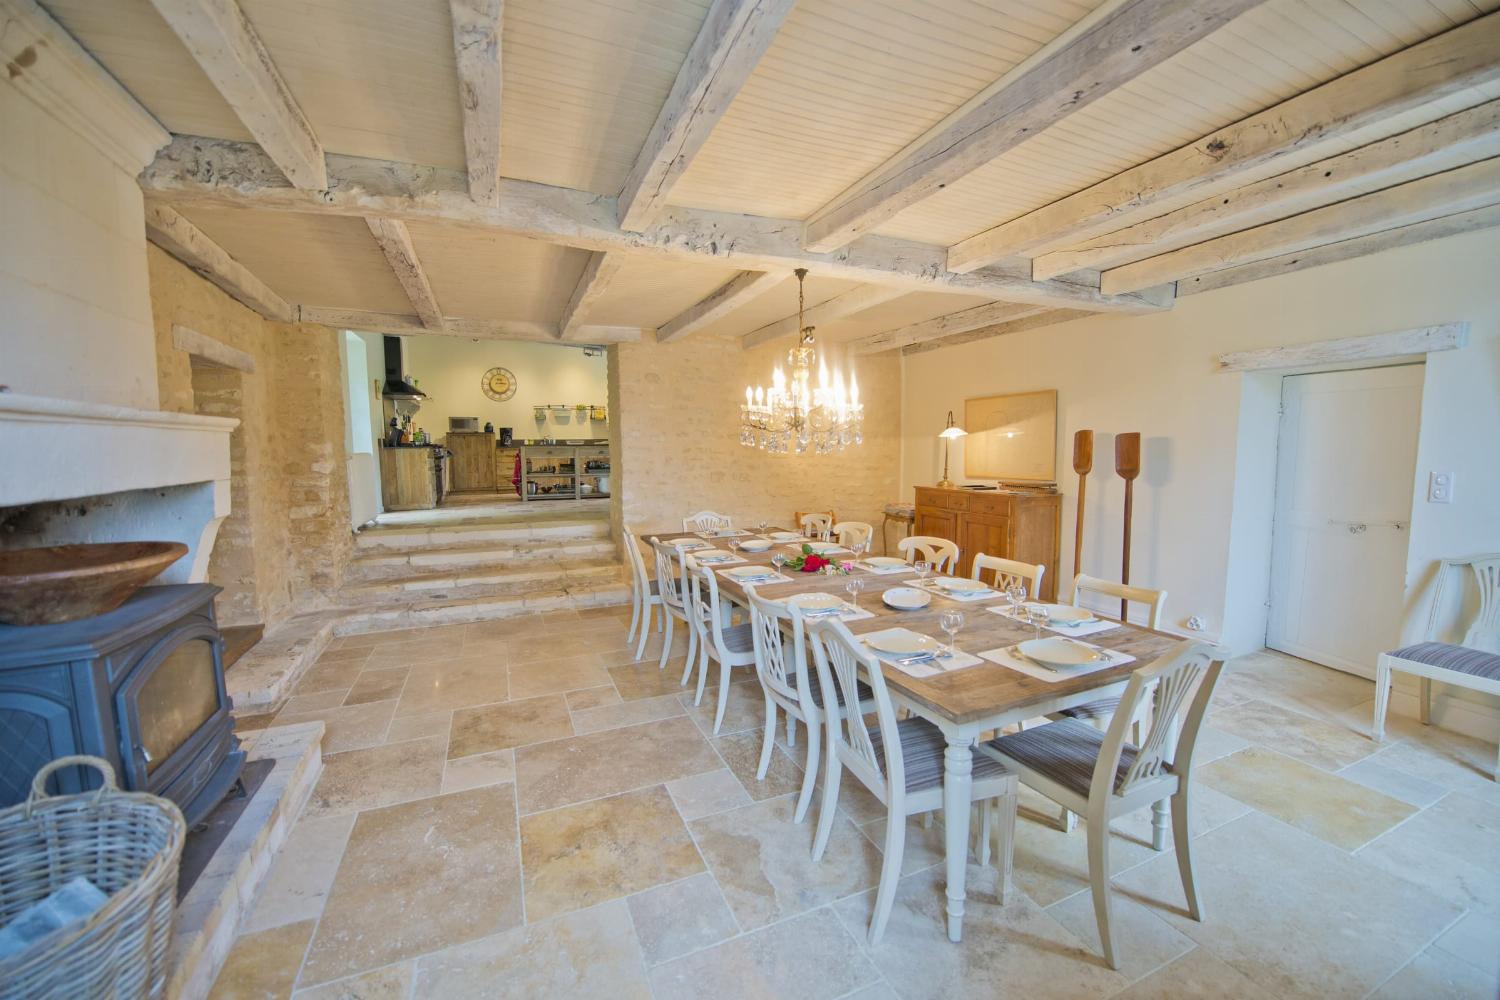 Dining room | Rental accommodation in Charente